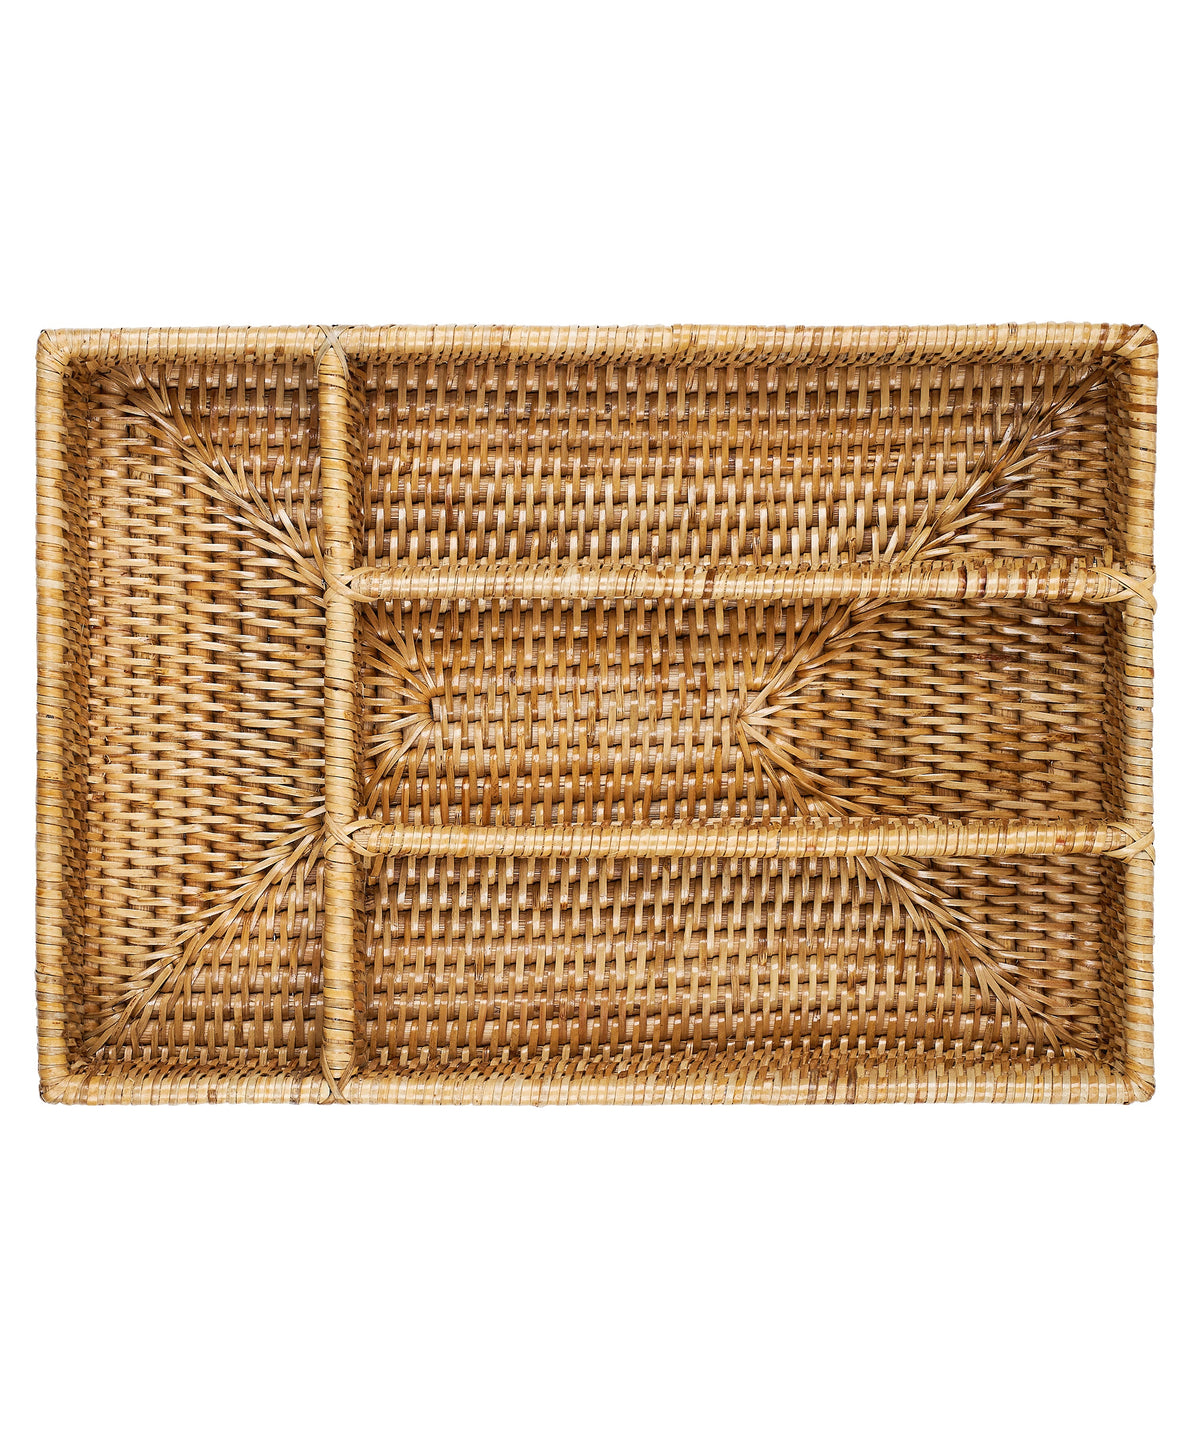 Rattan Cutlery Tray in Natural